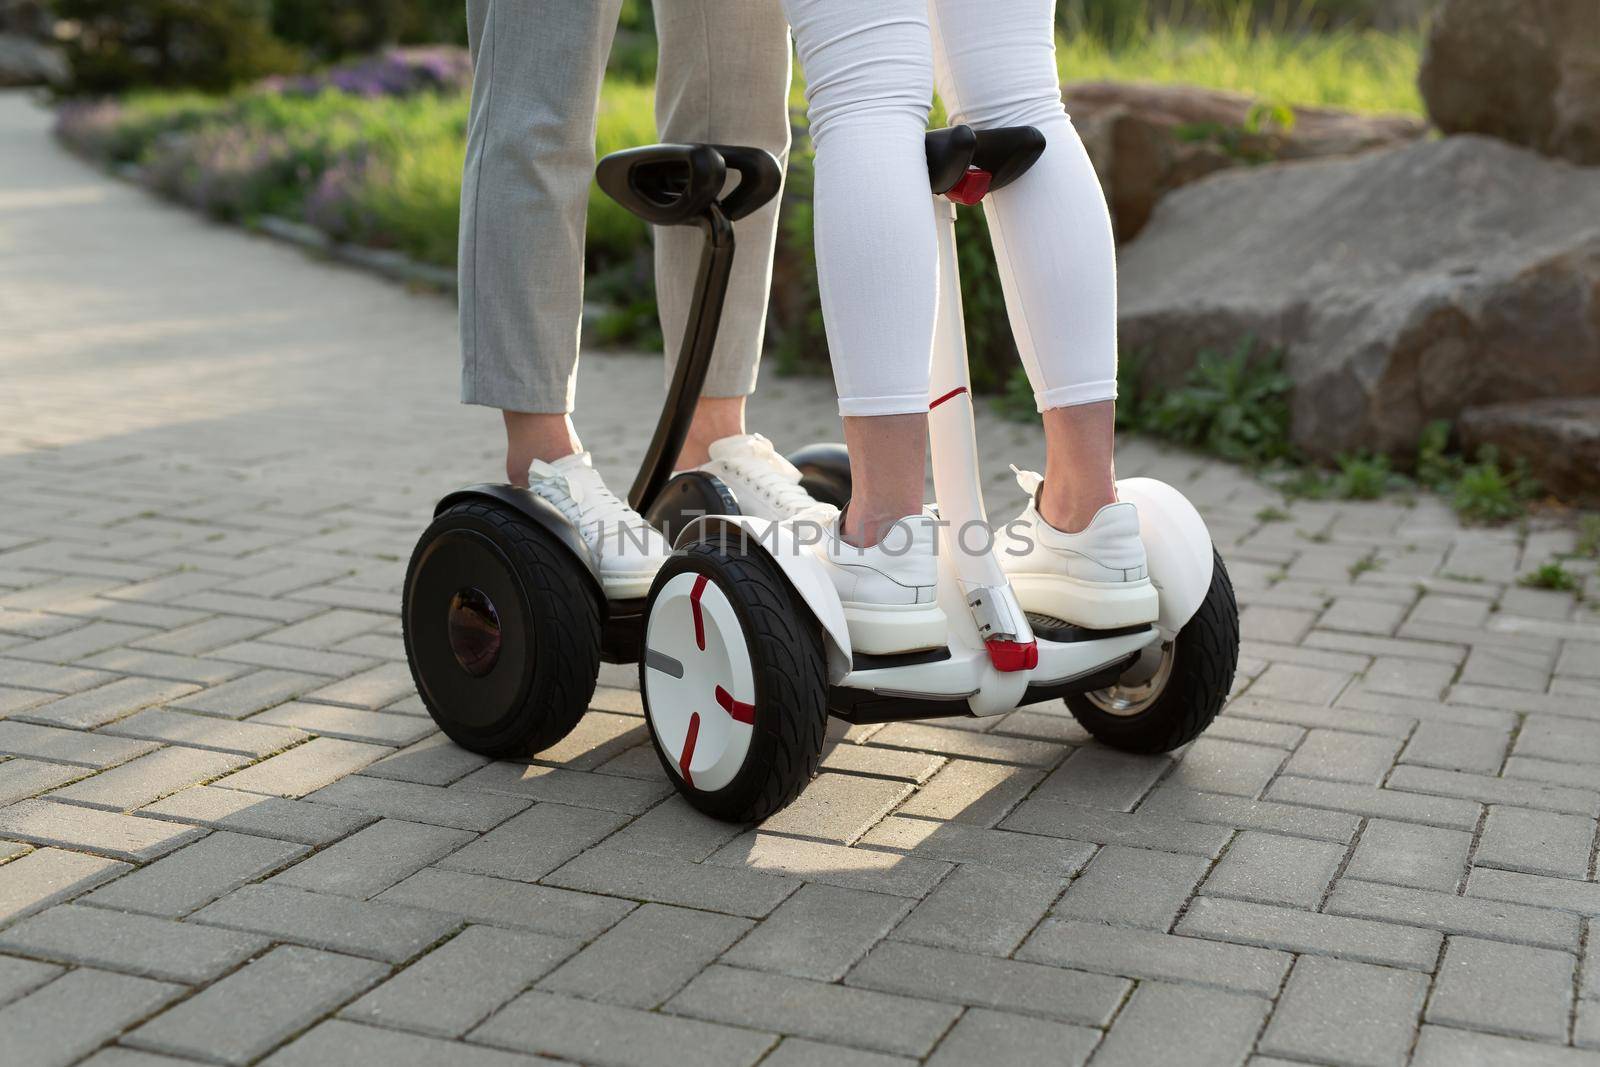 Legs of man and woman riding on the Hoverboard for relaxing time together outdoor at the city. by StudioPeace